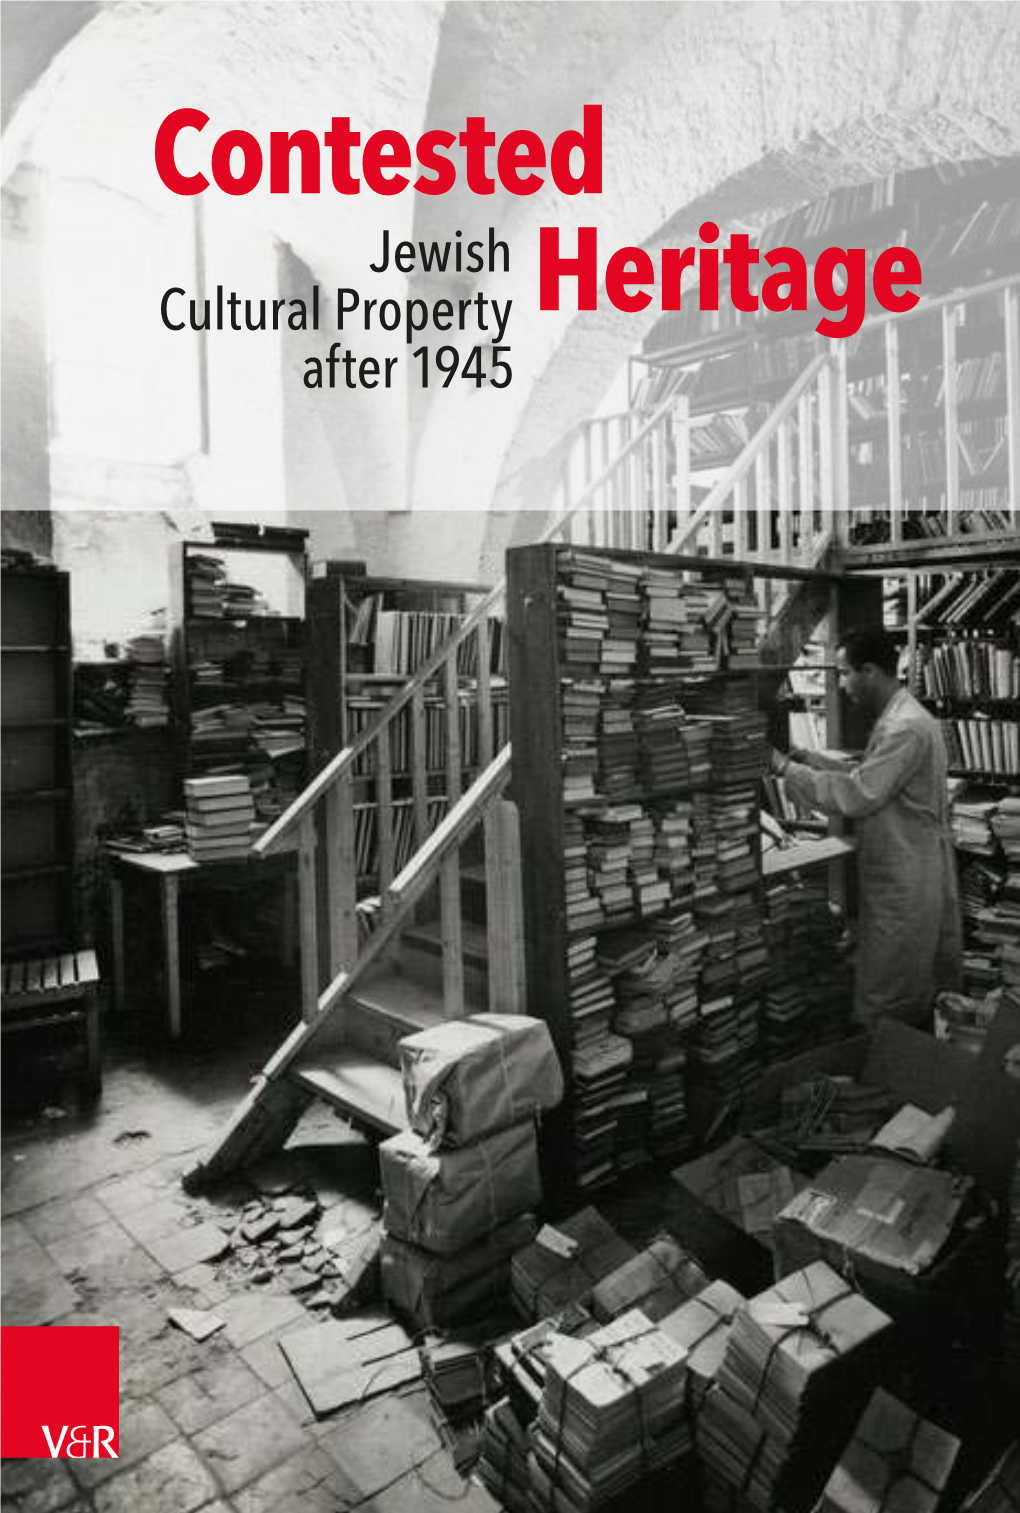 Contested Heritage. Jewish Cultural Property After 1945